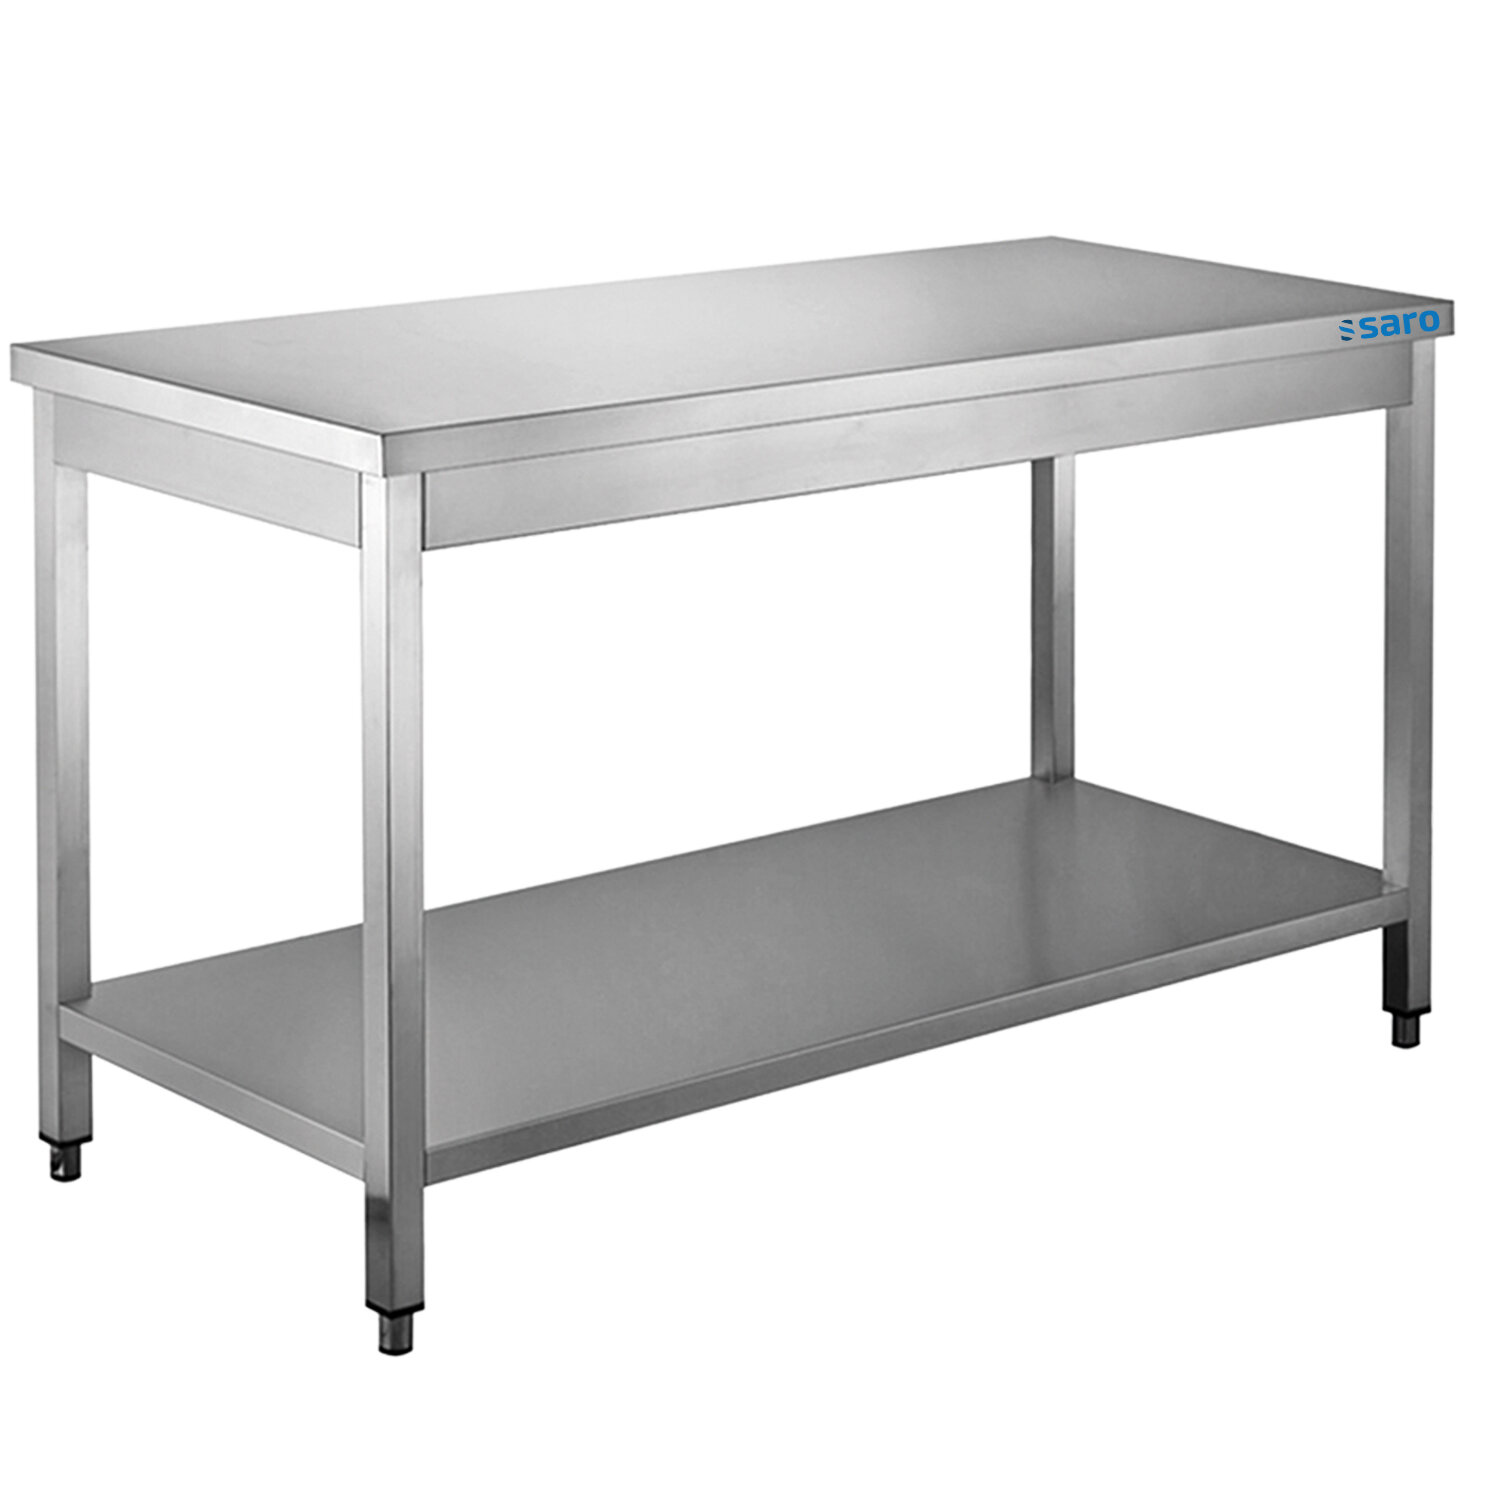 SARO Stainless steel table, with under shelf - 600 mm depth, 600mm